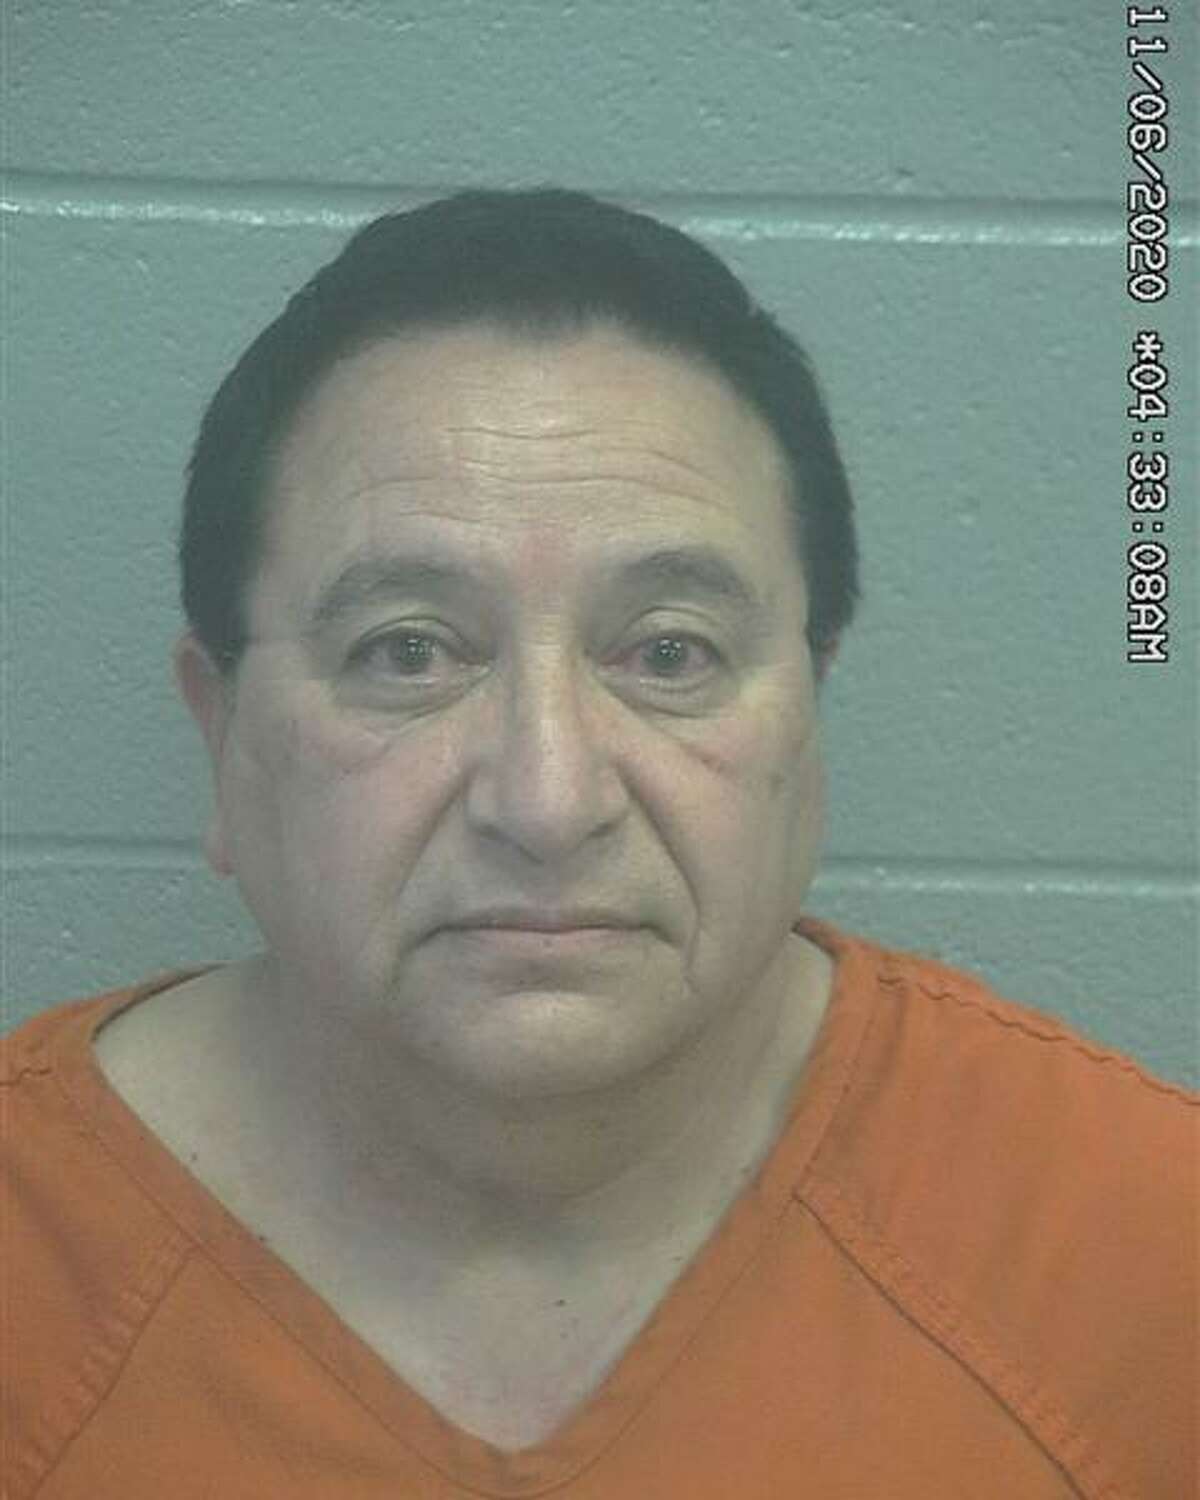 Alex Archuleta, 60, was charged with driving while intoxicated, a class B misdemeanor.